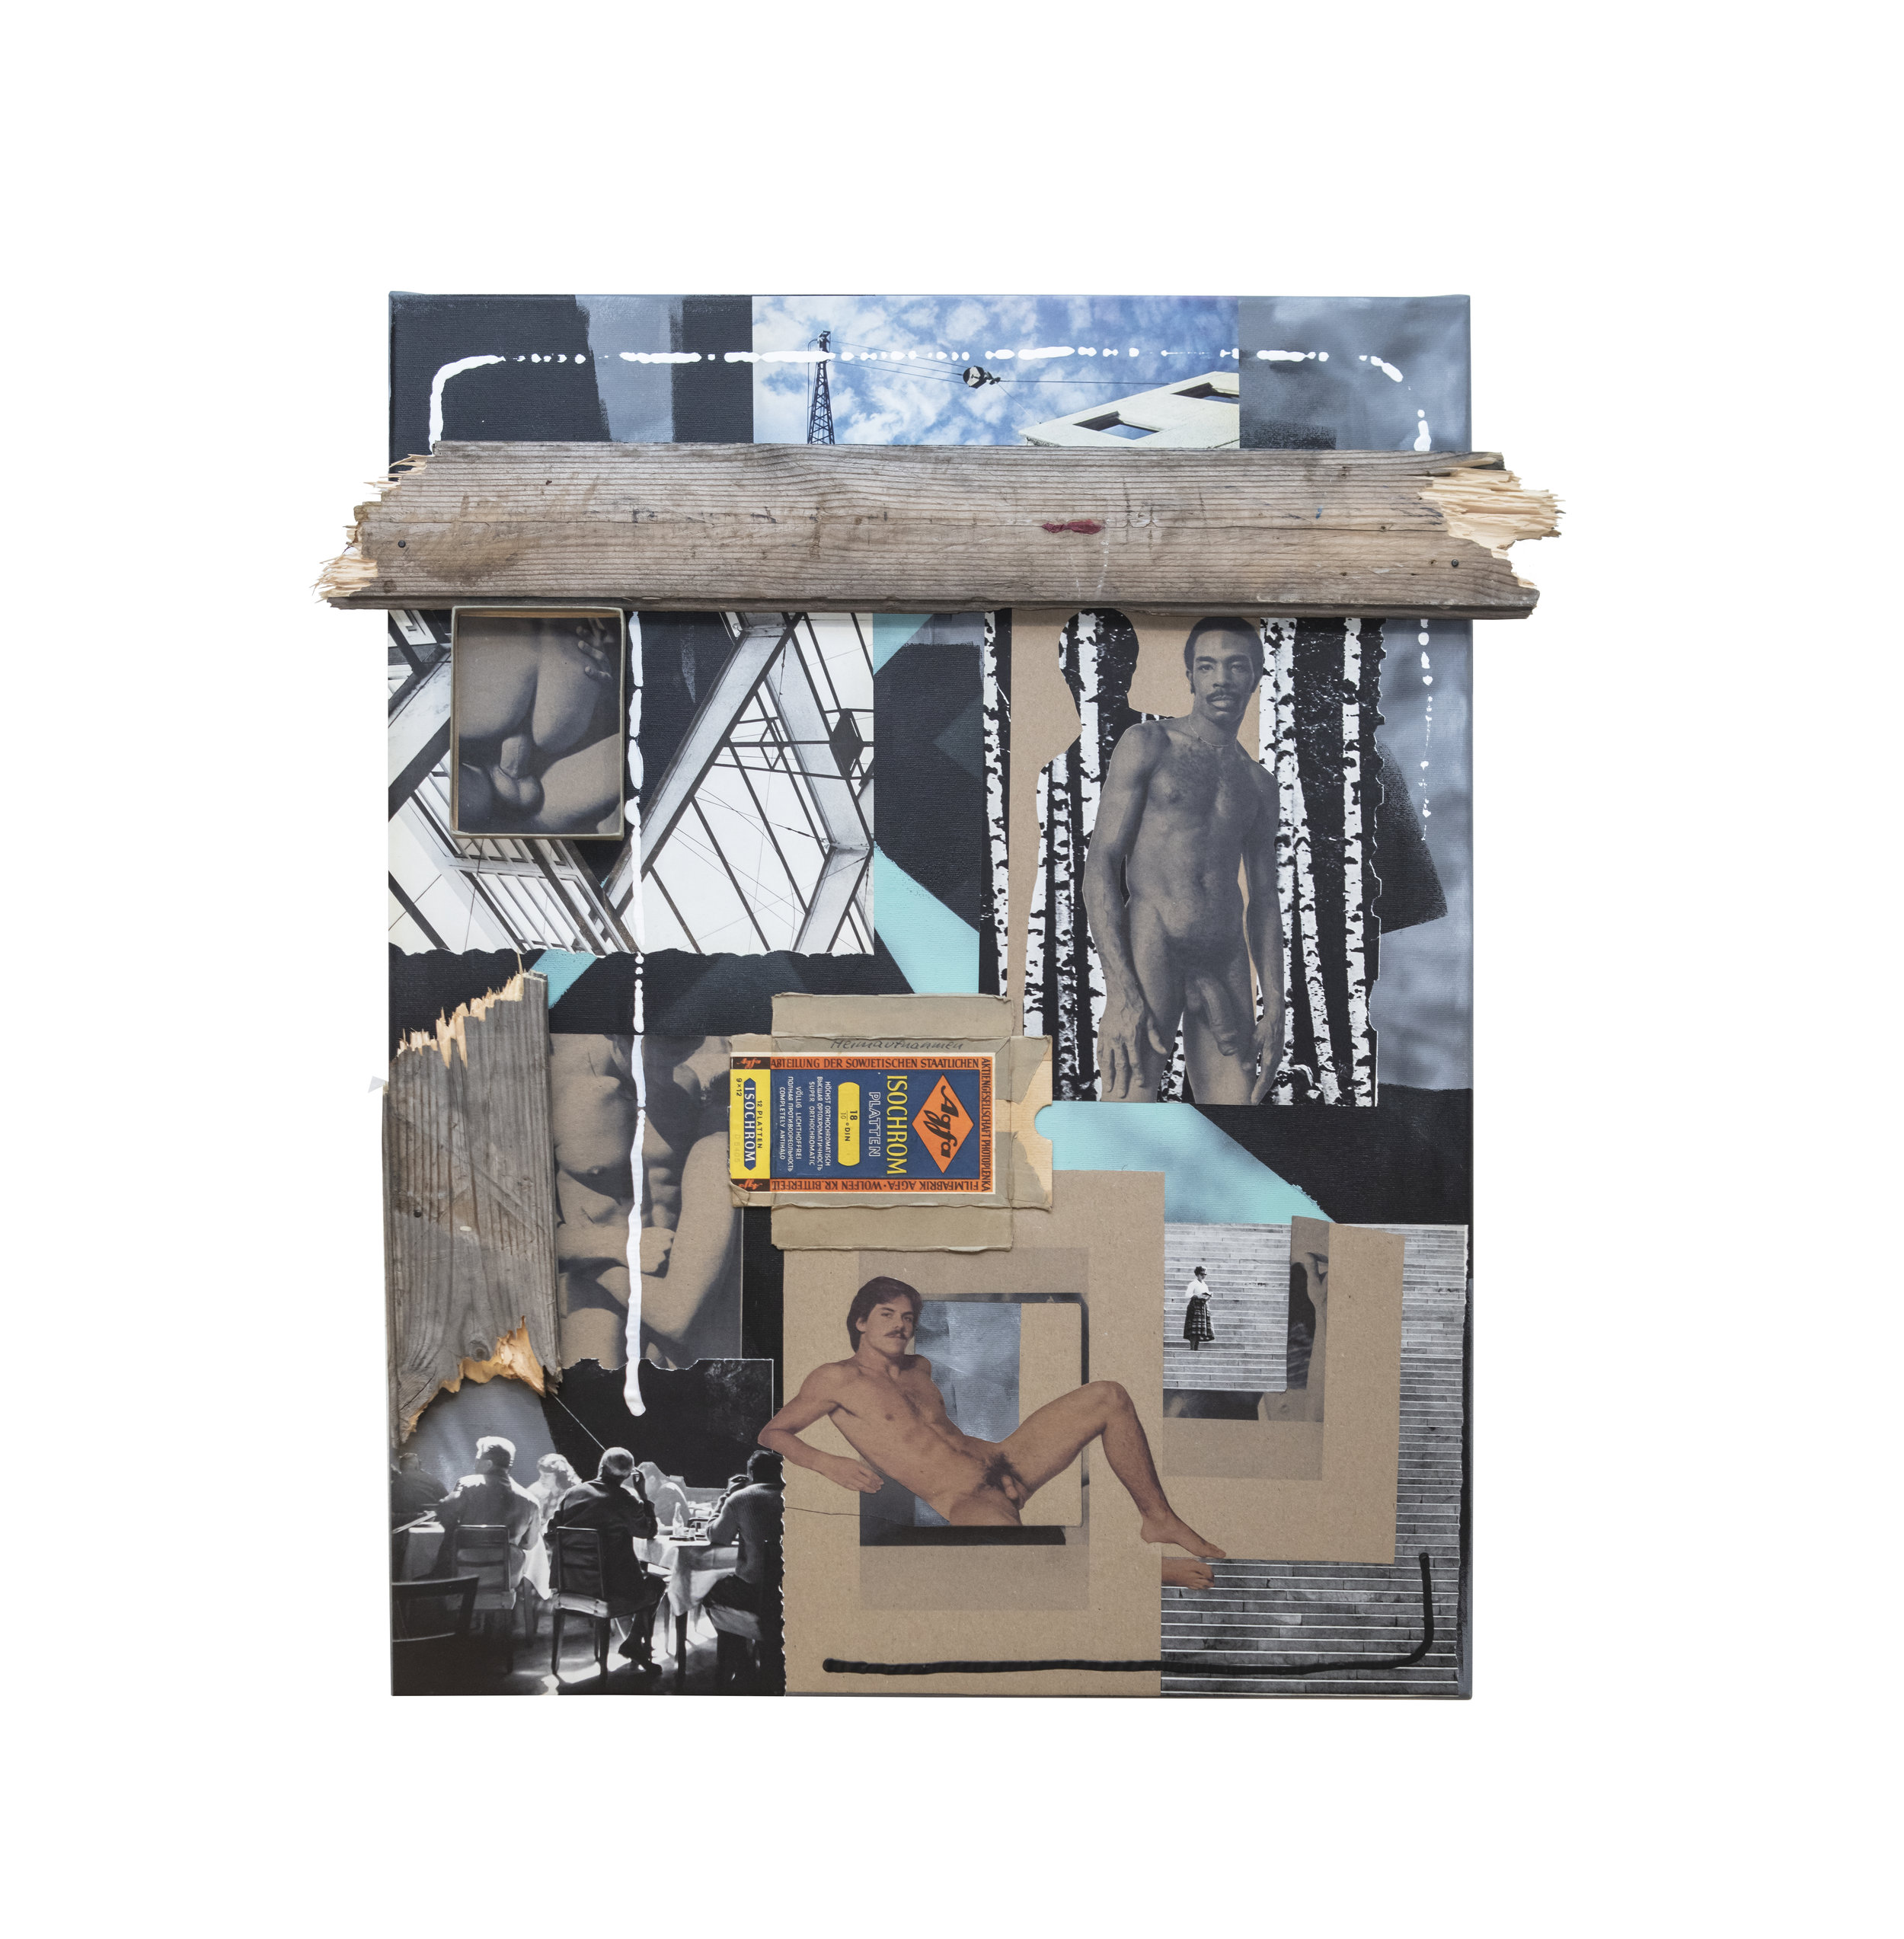   “In my mind…(02)”  - assemblage, paper collage, spray paint, acrylic paint, wood on canvas, signed and titled on the back (2018) [66x80cm]  